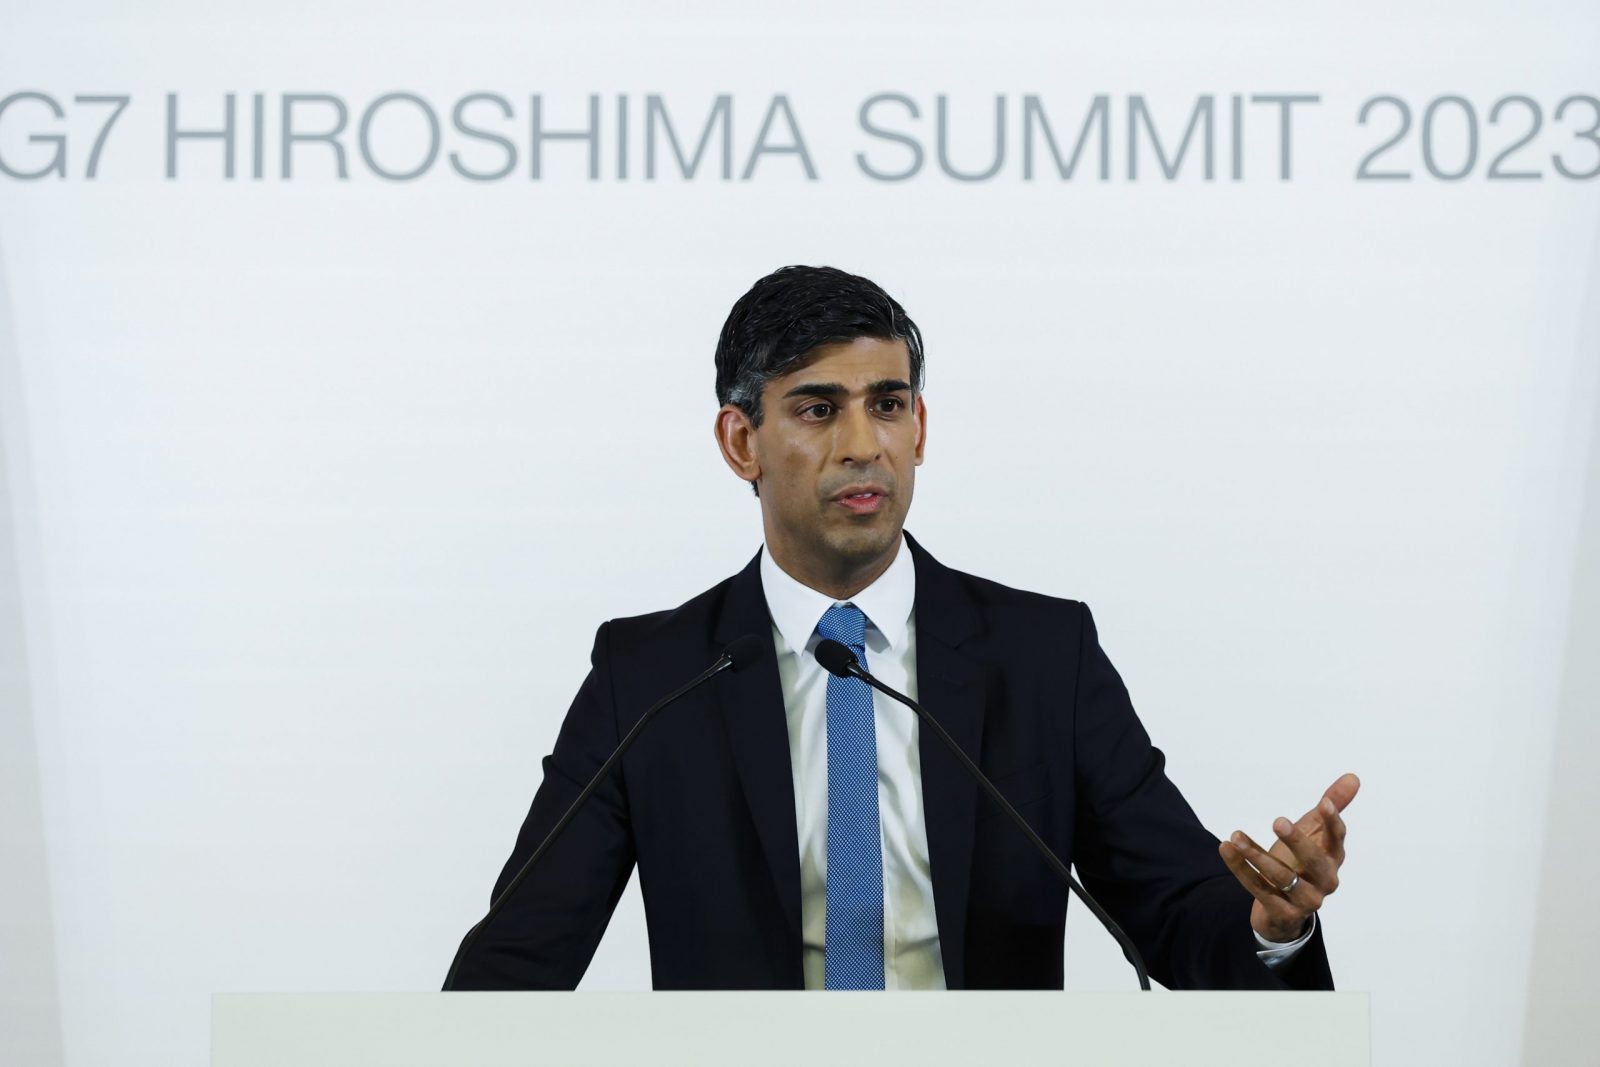 epa10642701 British Prime Minister Rishi Sunak attends a press conference following the G7 leaders' summit in Hiroshima, western Japan, 21 May 2023. The G7 Hiroshima Summit will be held from 19 to 21 May 2023.  EPA/ISSEI KATO / POOL